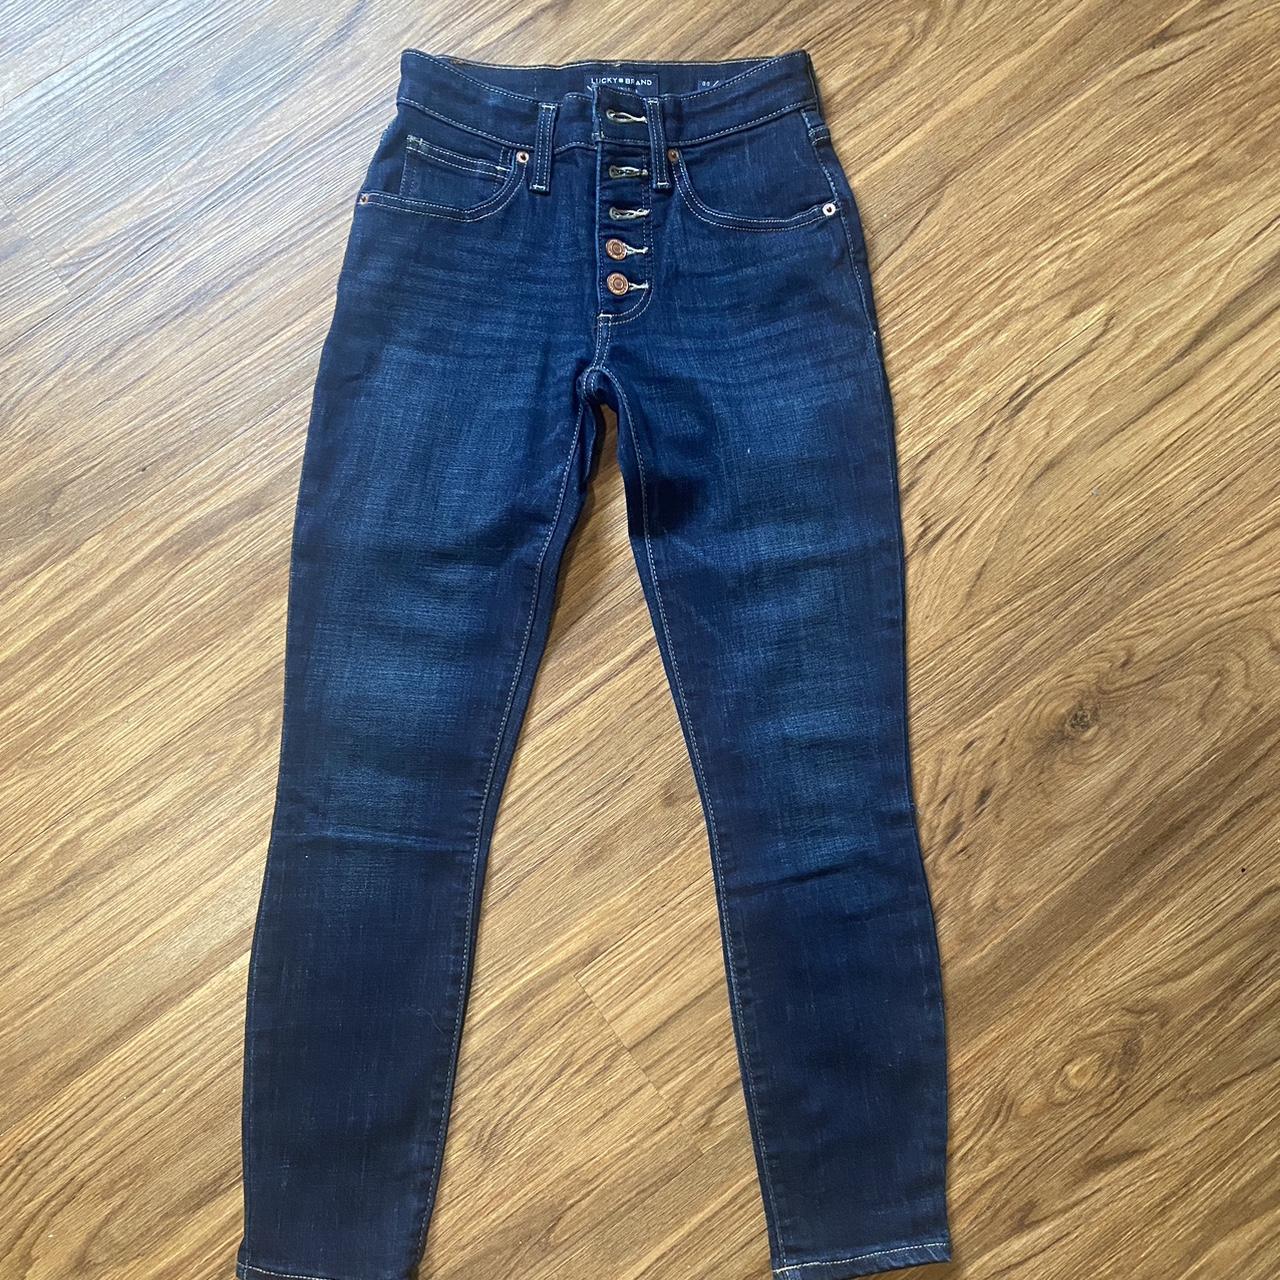 lucky brand jeans size 00/24